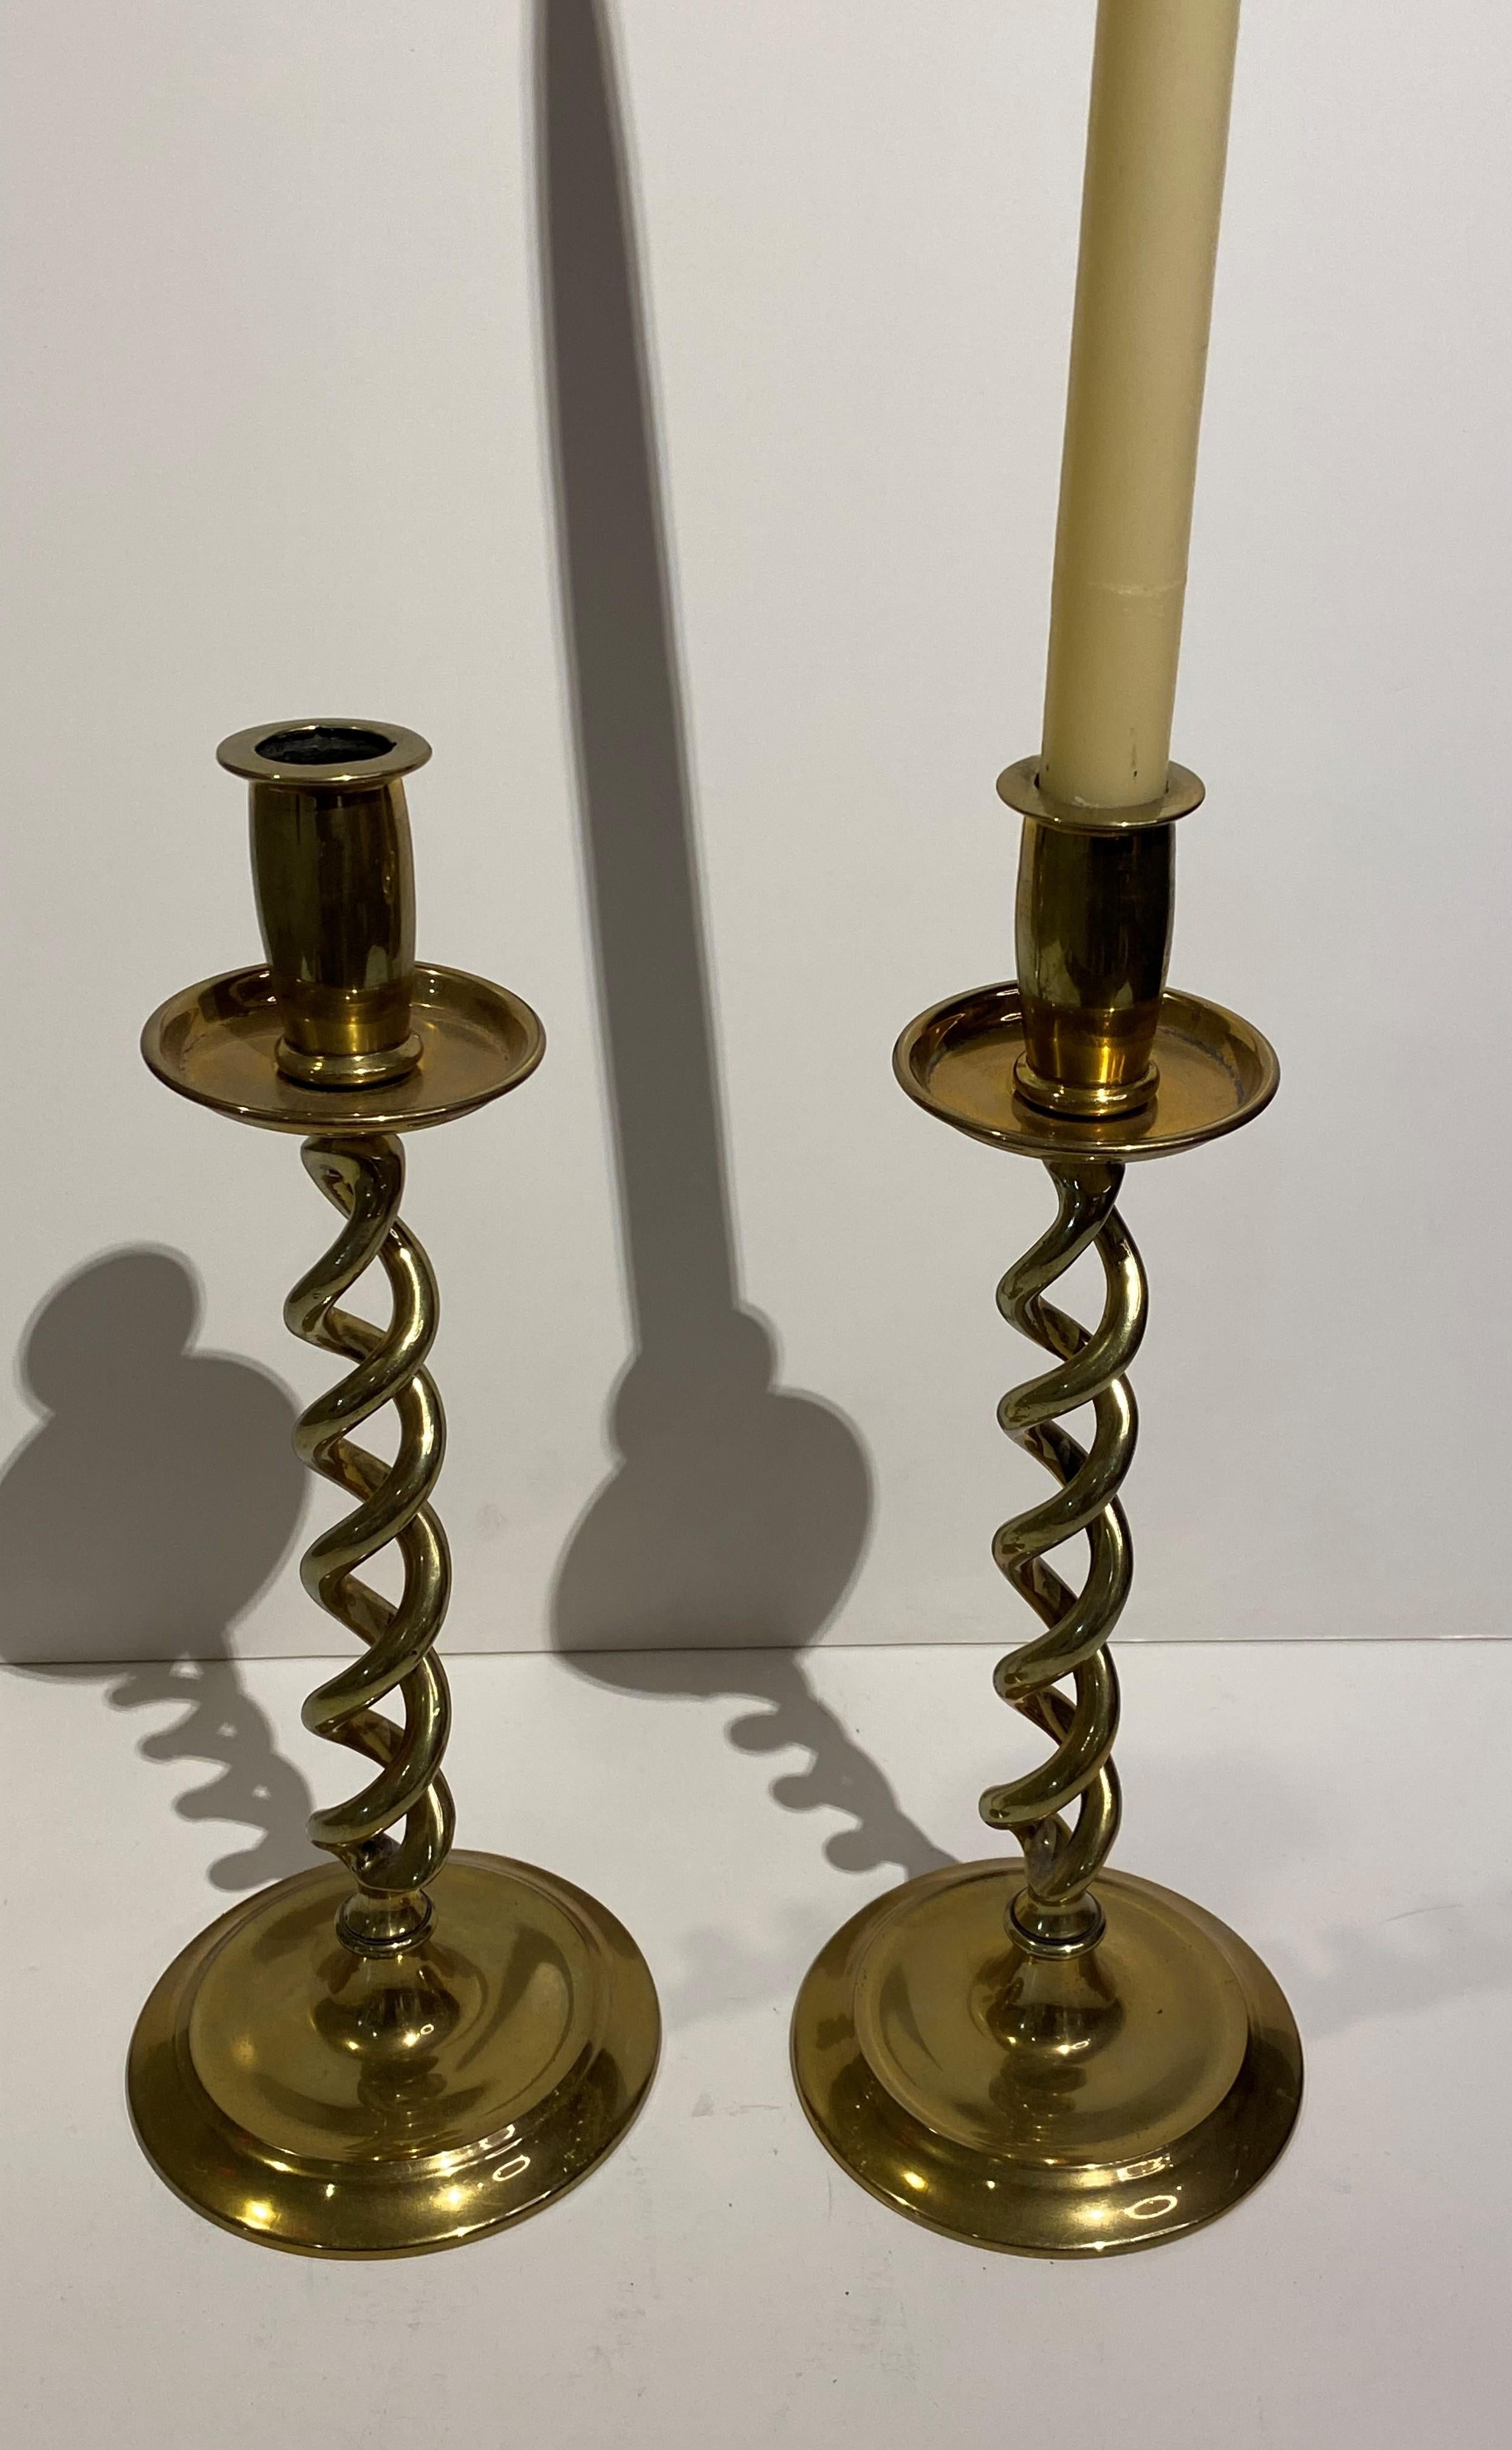 Pair of Old Open Twist Brass Candlesticks from England For Sale 3